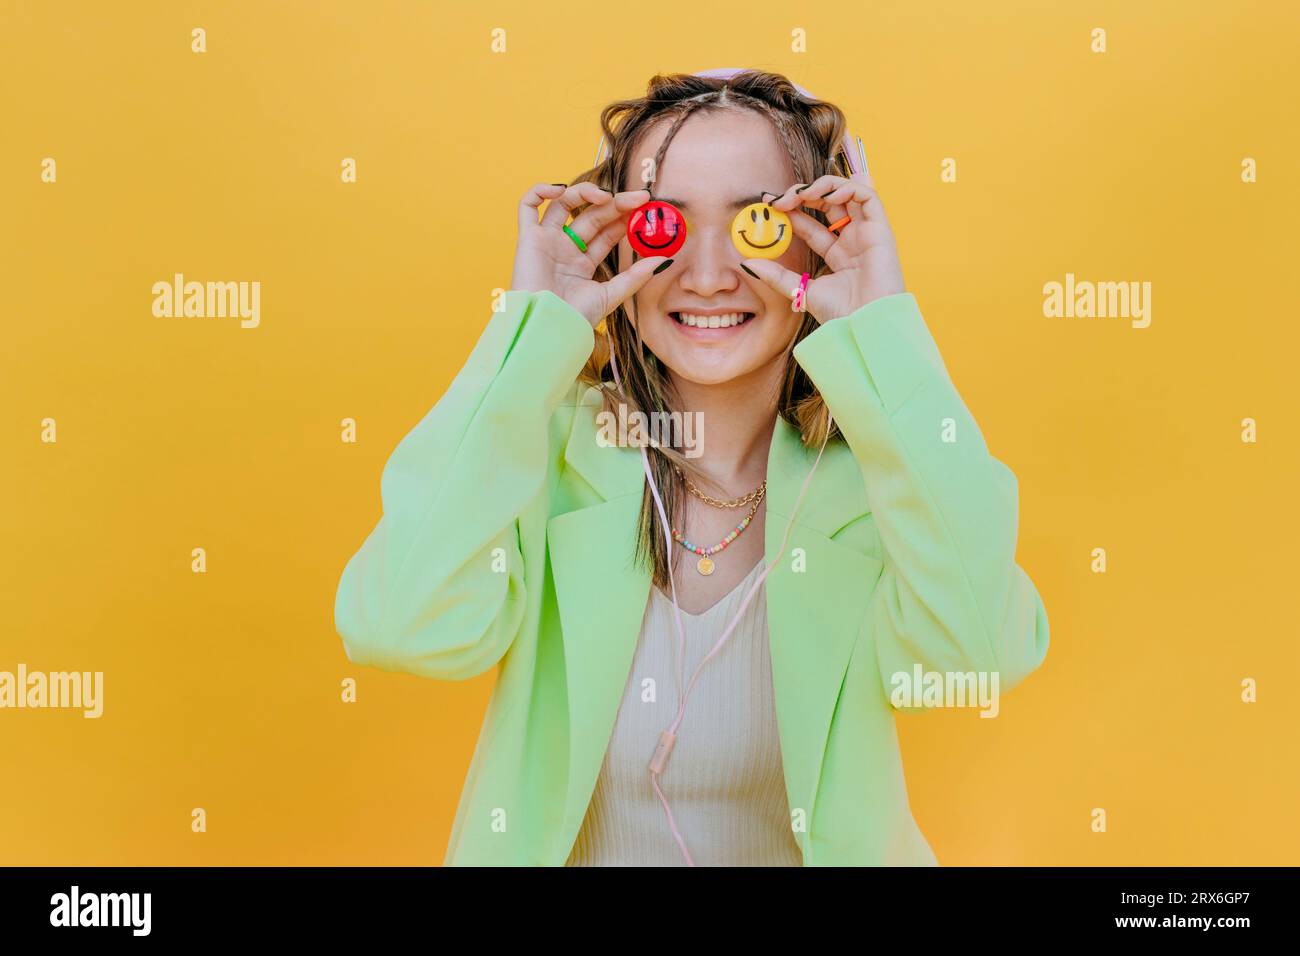 Smiling woman covering eyes with smileys against yellow background Stock Photo